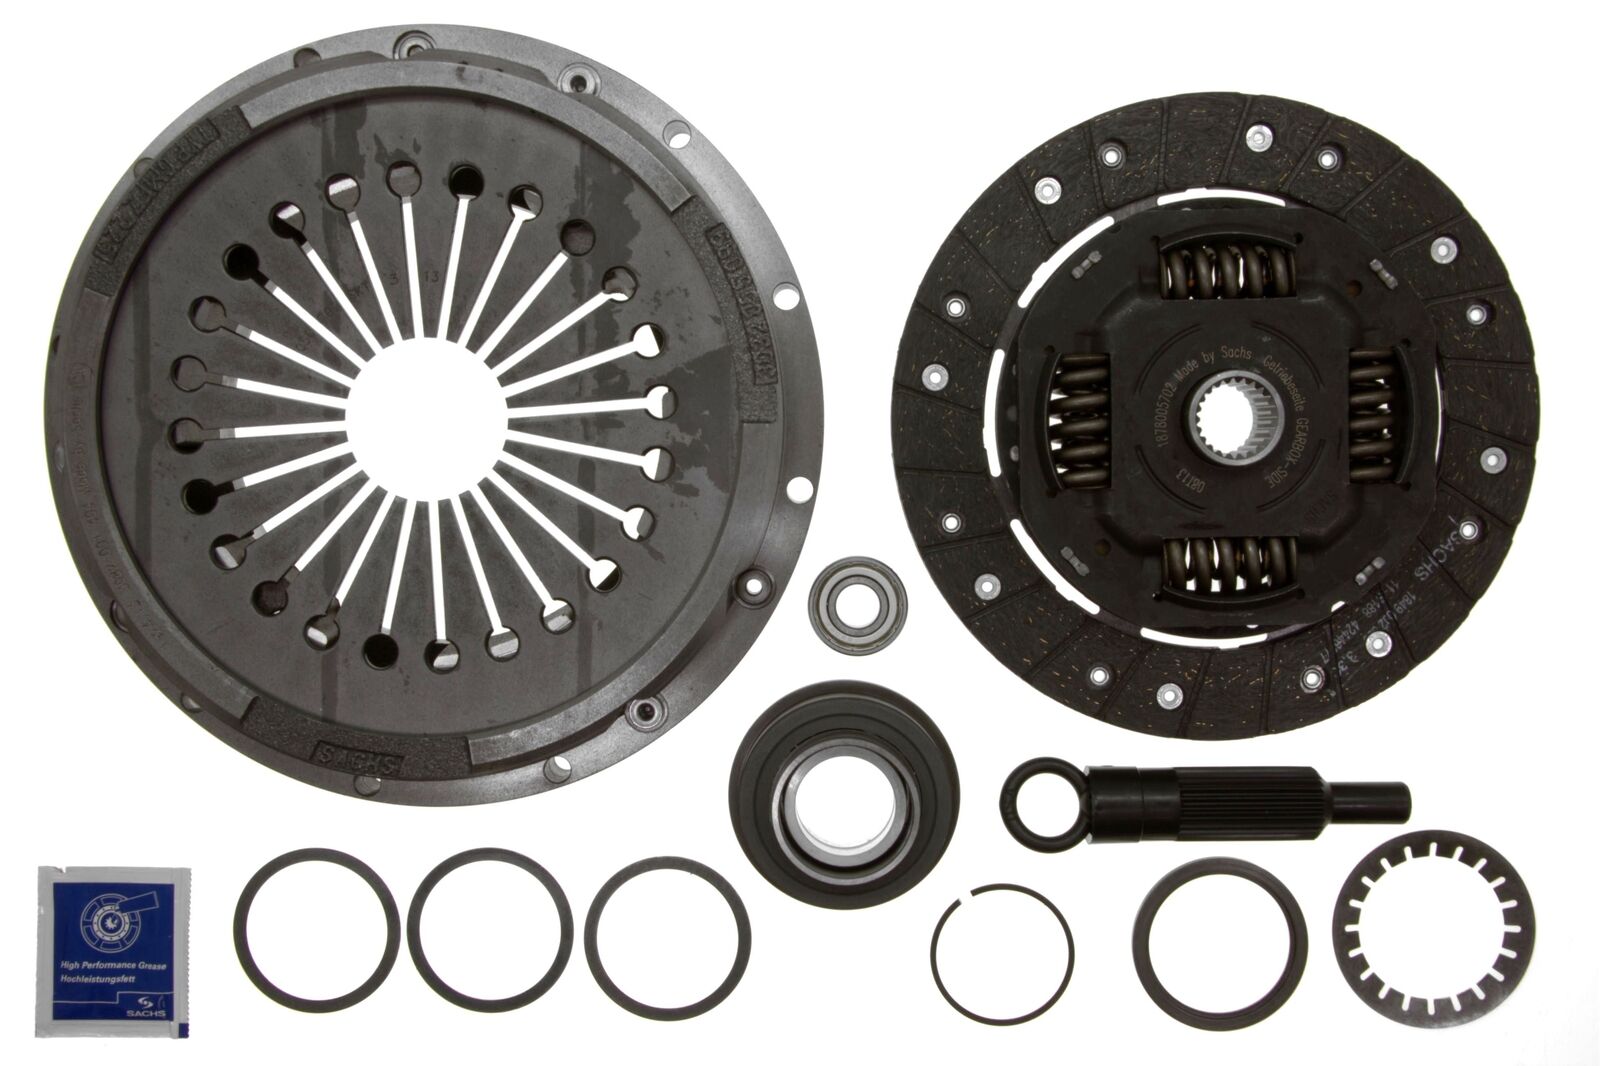  Clutch Kit for Porsche 944 1983 - 1991 & Others SACHSKF298-02